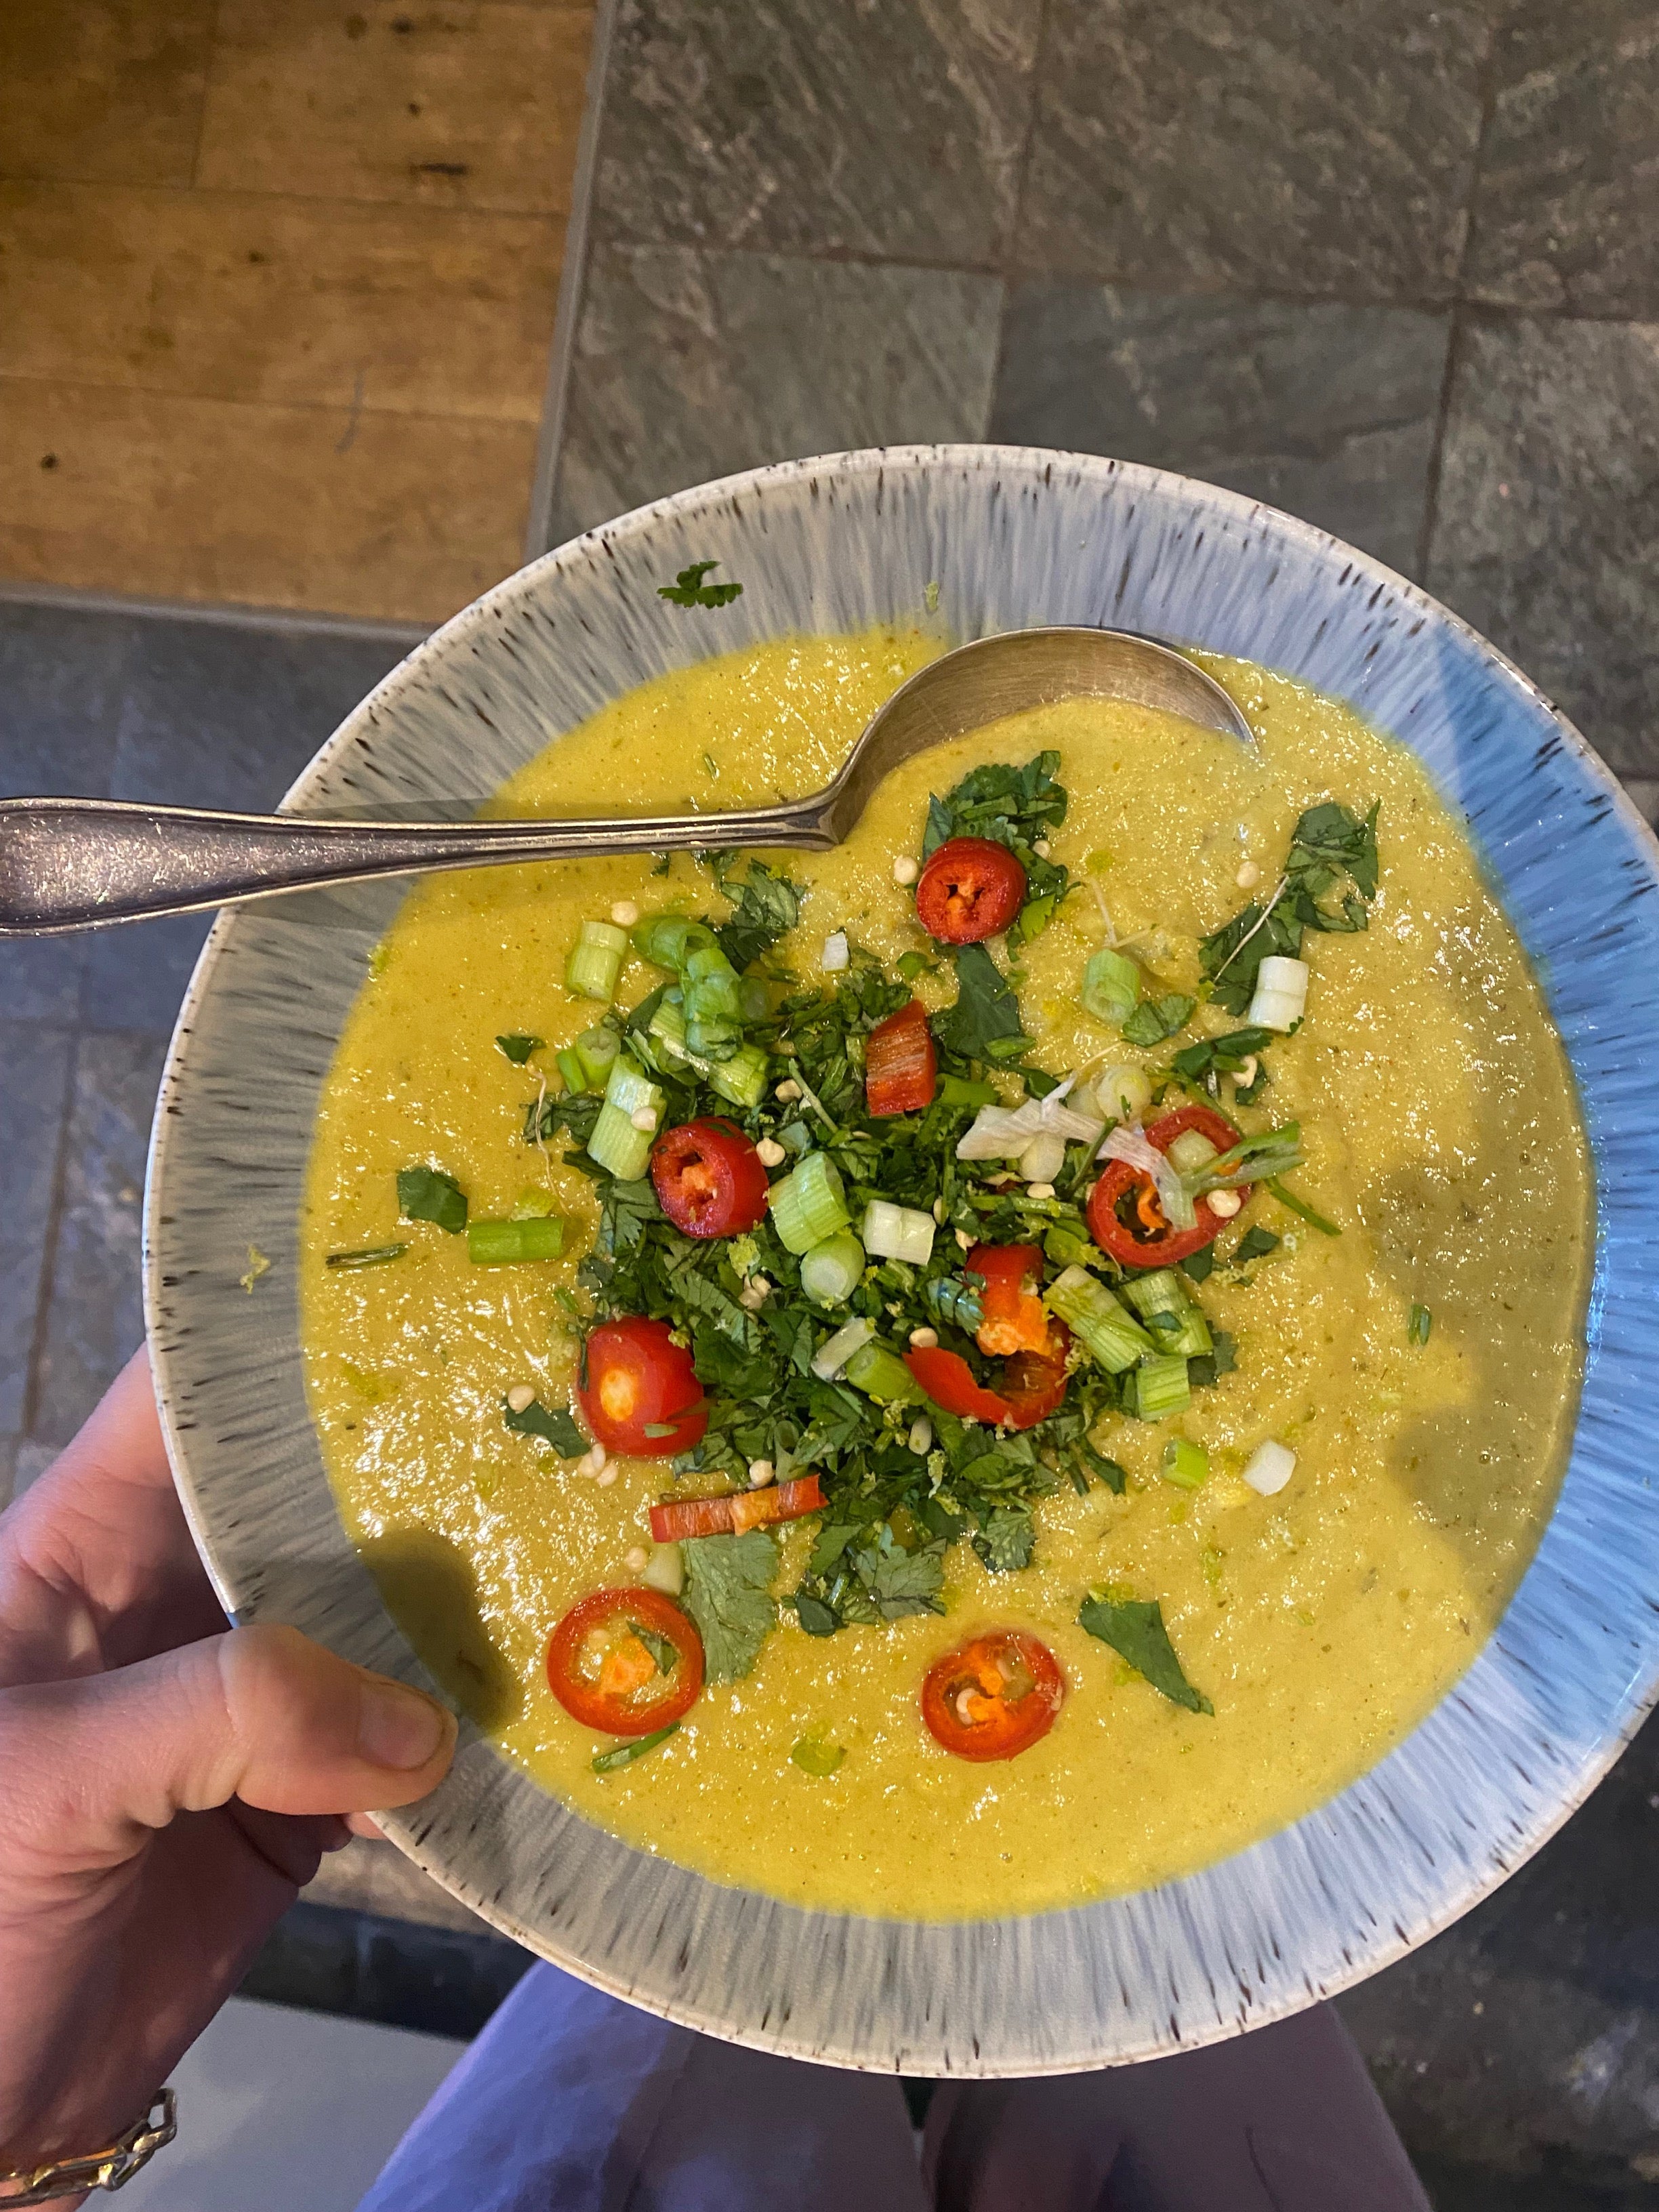 Thought team recipes: Lucinda’s light ‘n’ spicy vegan curried cauliflower soup